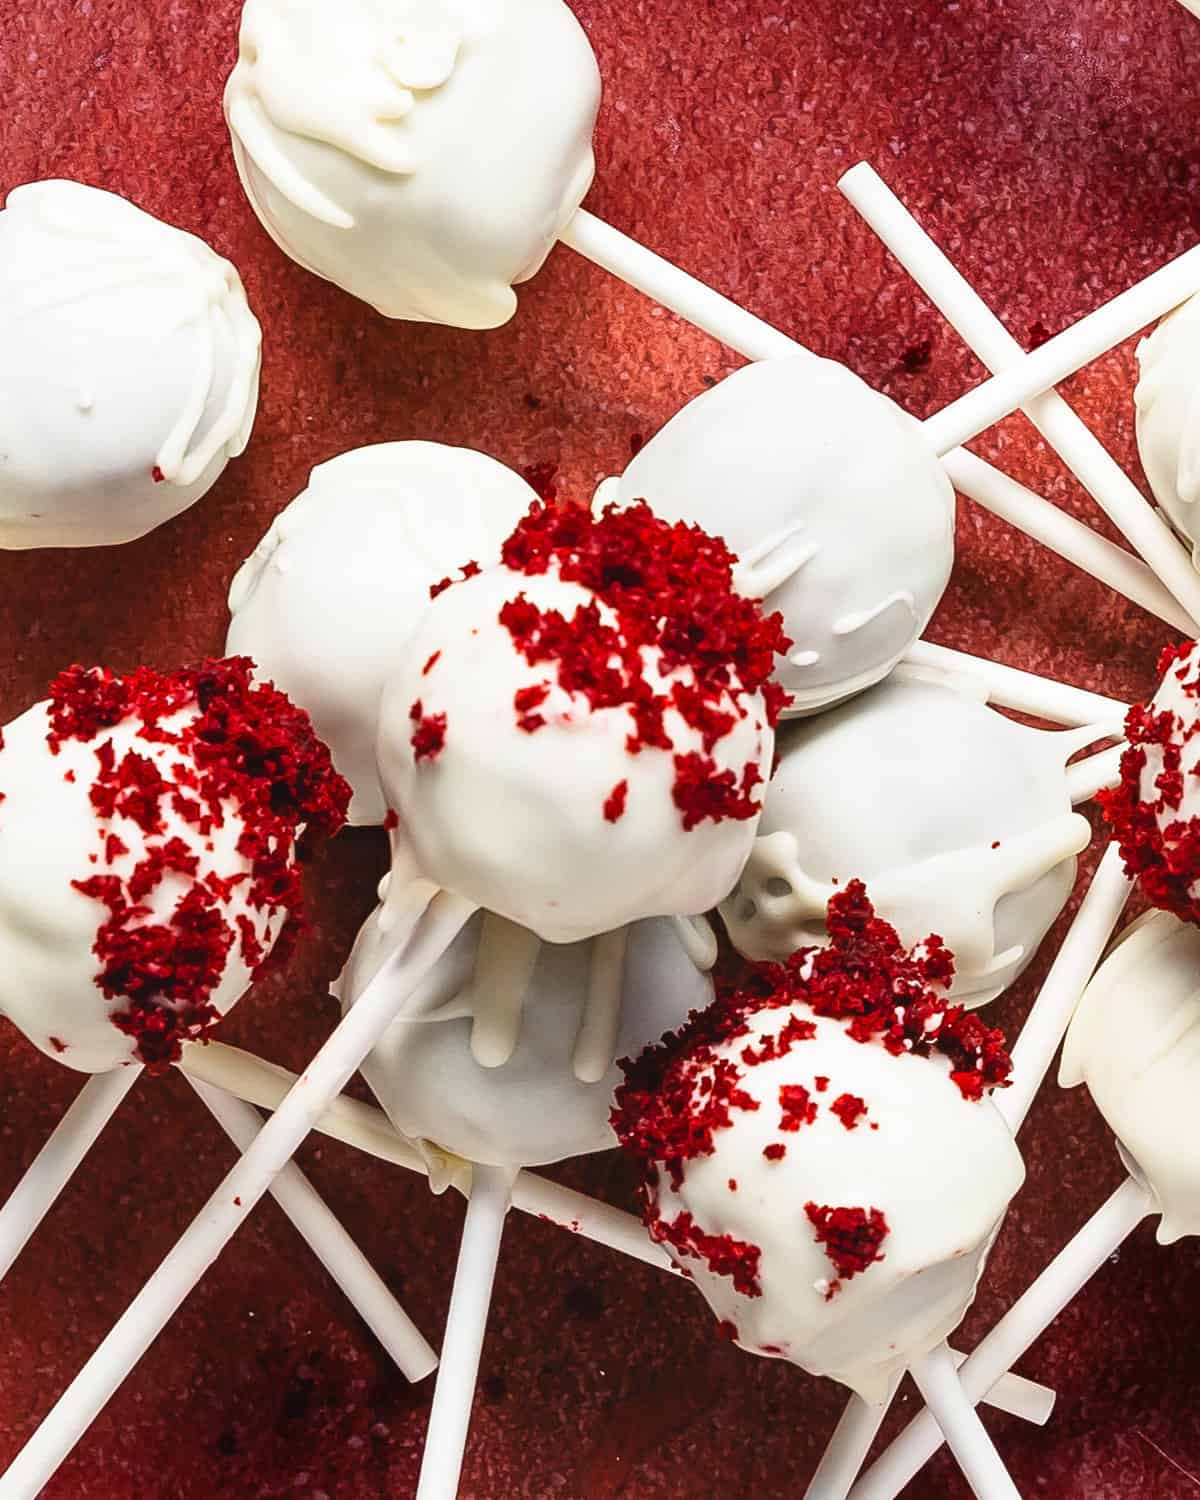 Red velvet cake pops are decadent and delicious red velvet cake balls made from red velvet cake and cream cheese frosting covered in white chocolate. These red velvet truffles are super simple to make using box cake mix, store bought frosting and white chocolate candy melts.